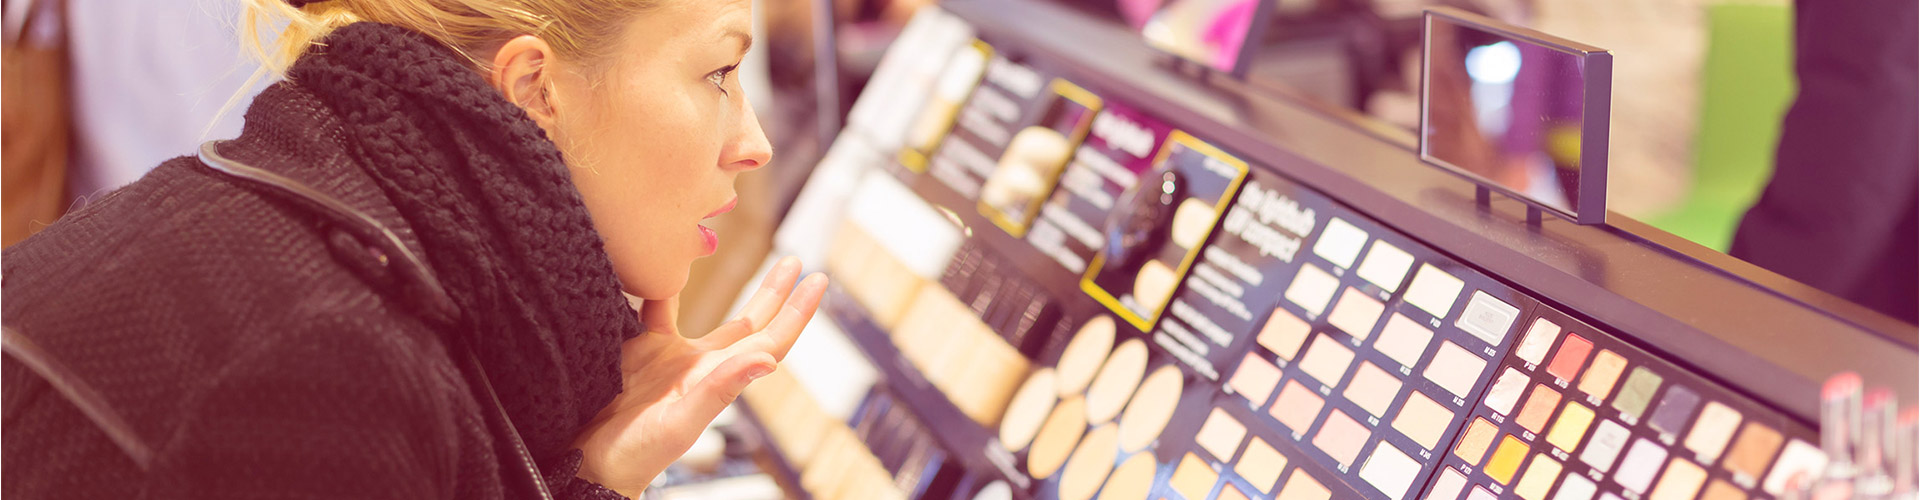 Blog banner featuring close up of blonde woman looking at makeup display in store